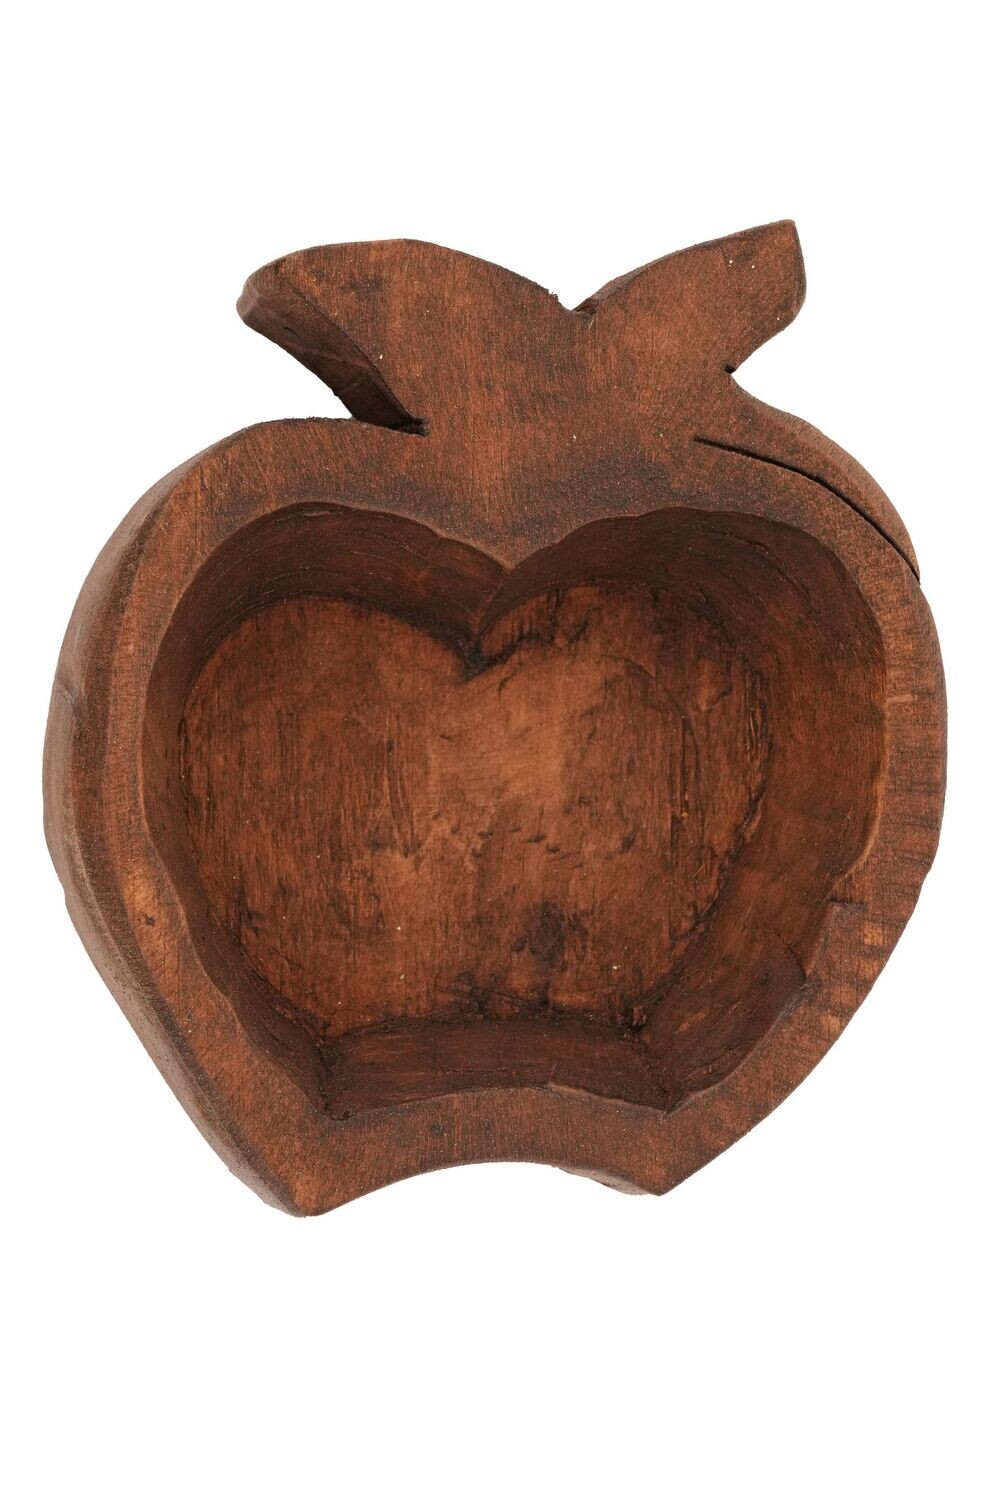 Apple Dough Bowl-Candle Ready-6x7 inches-NEW-Apple